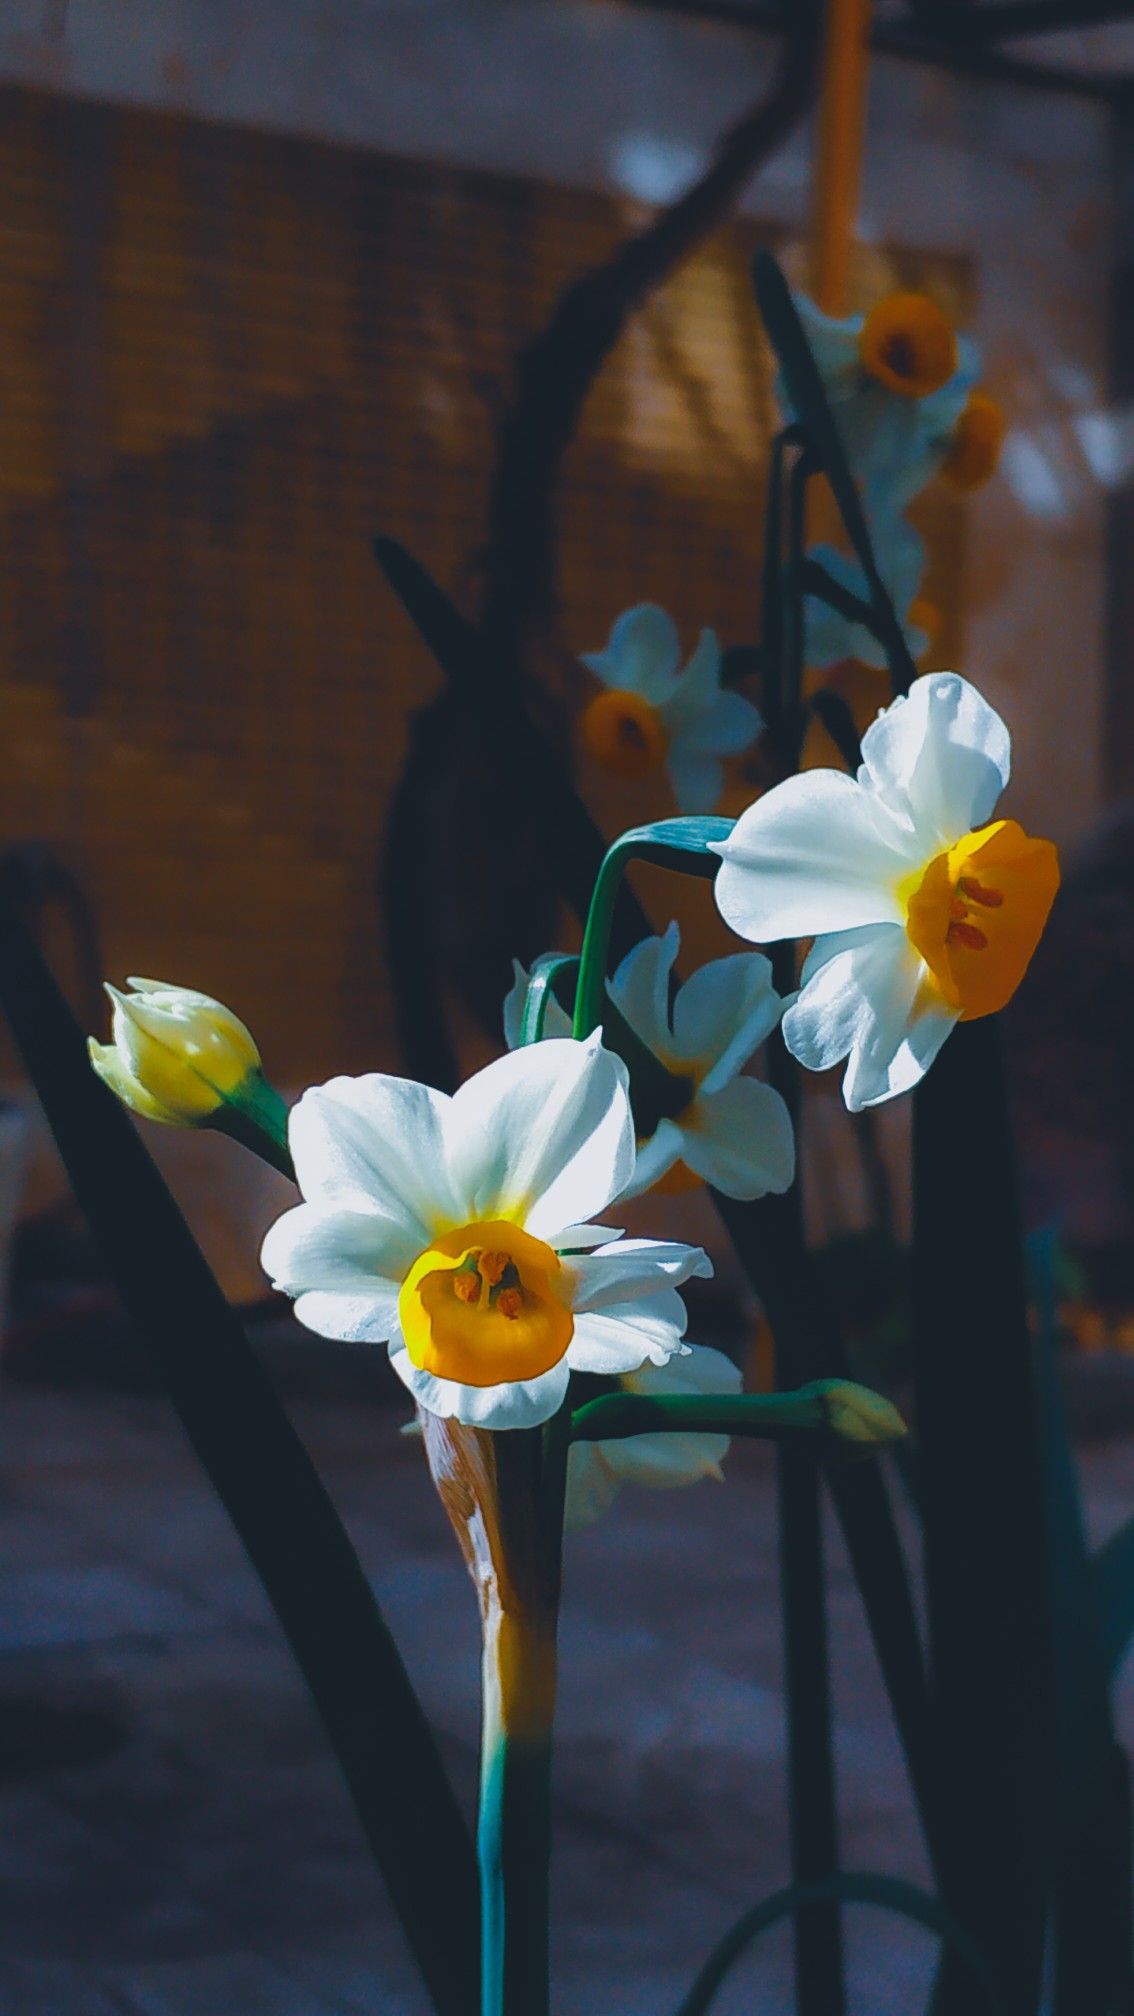 Narcissus. Narcissus flower, Flower aesthetic, Flowers photography